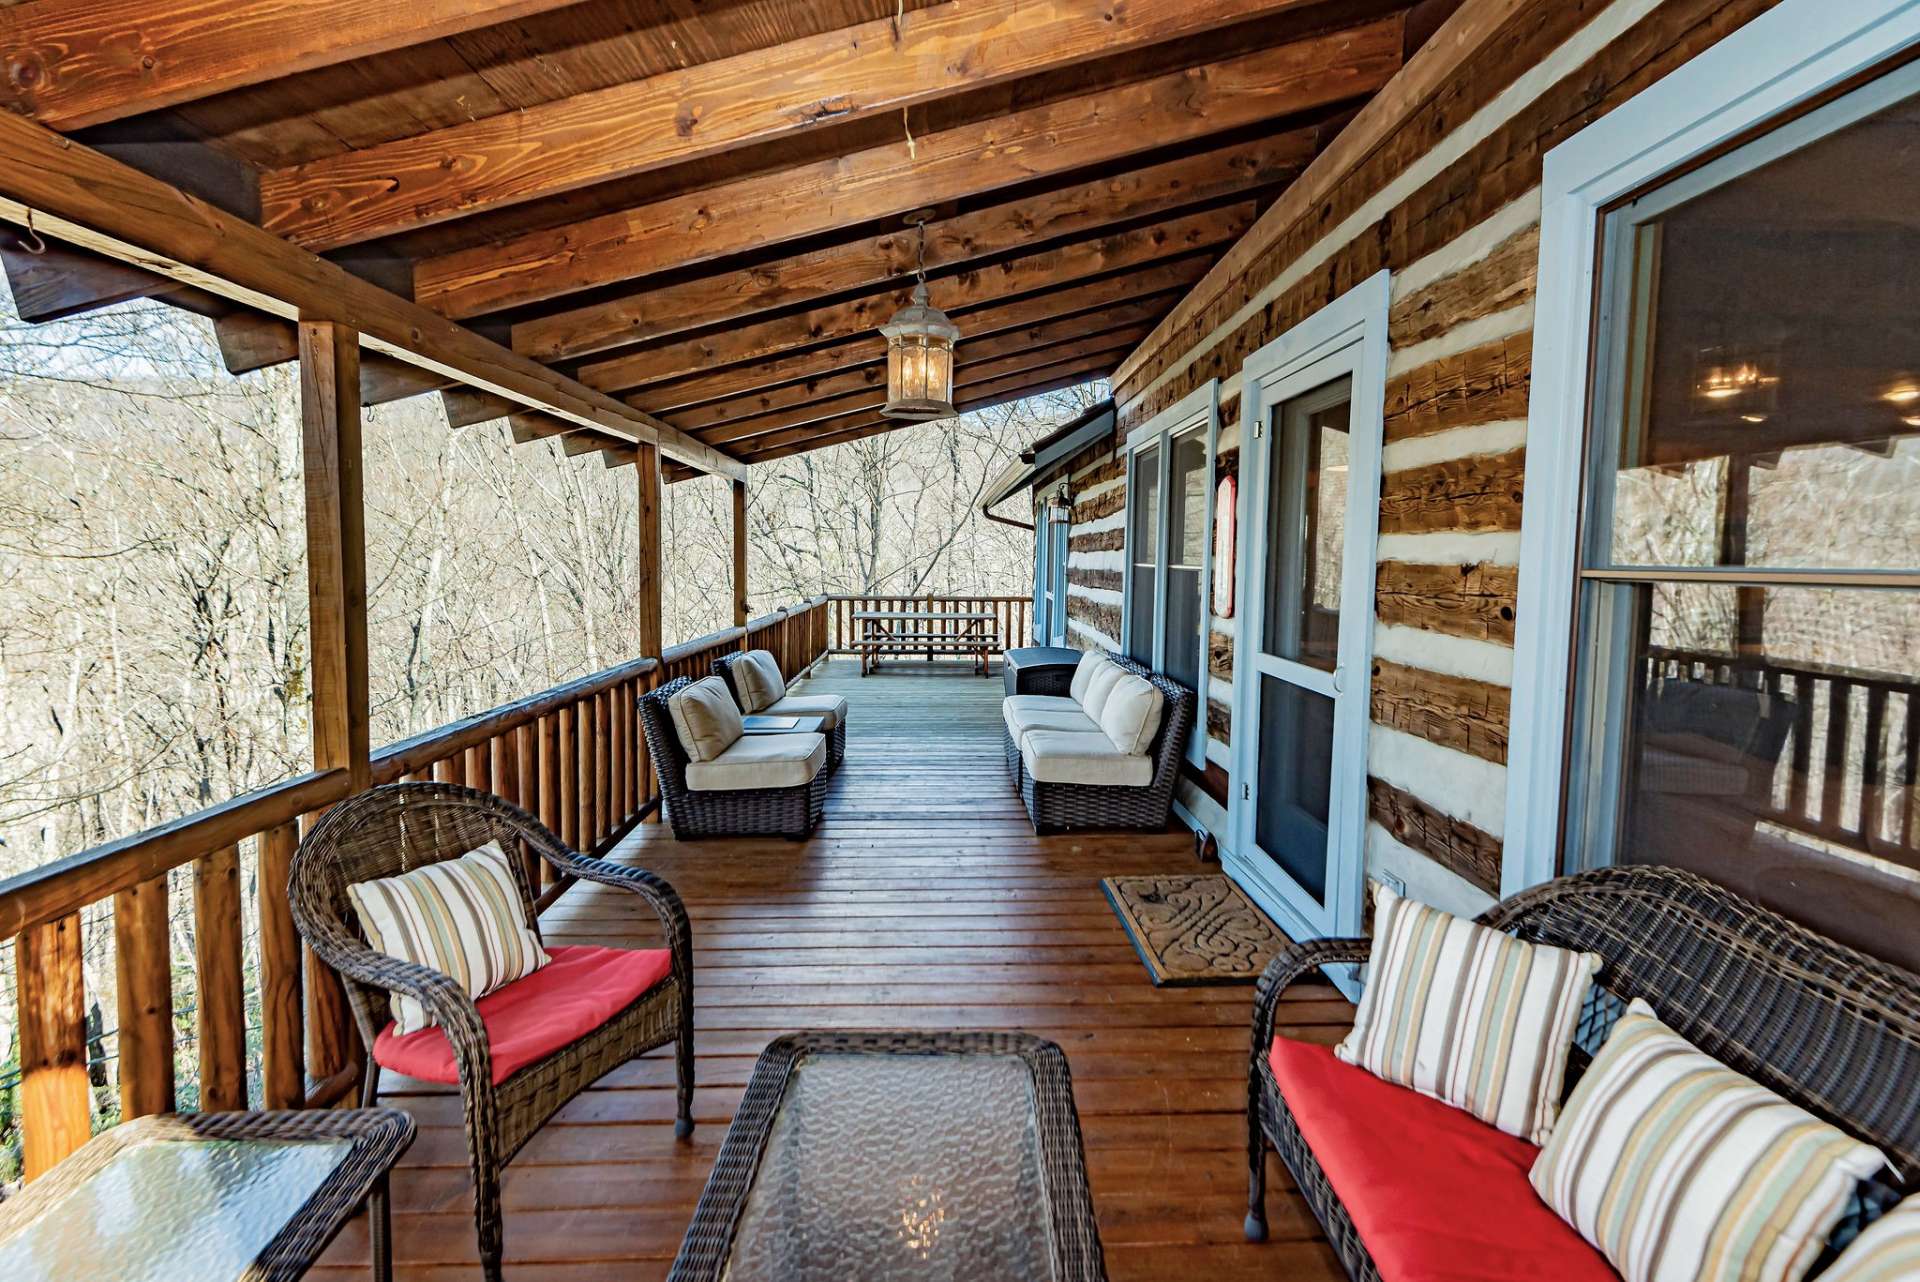 The main level porch has both covered and open areas to take advantage of the beautiful outdoor living space.